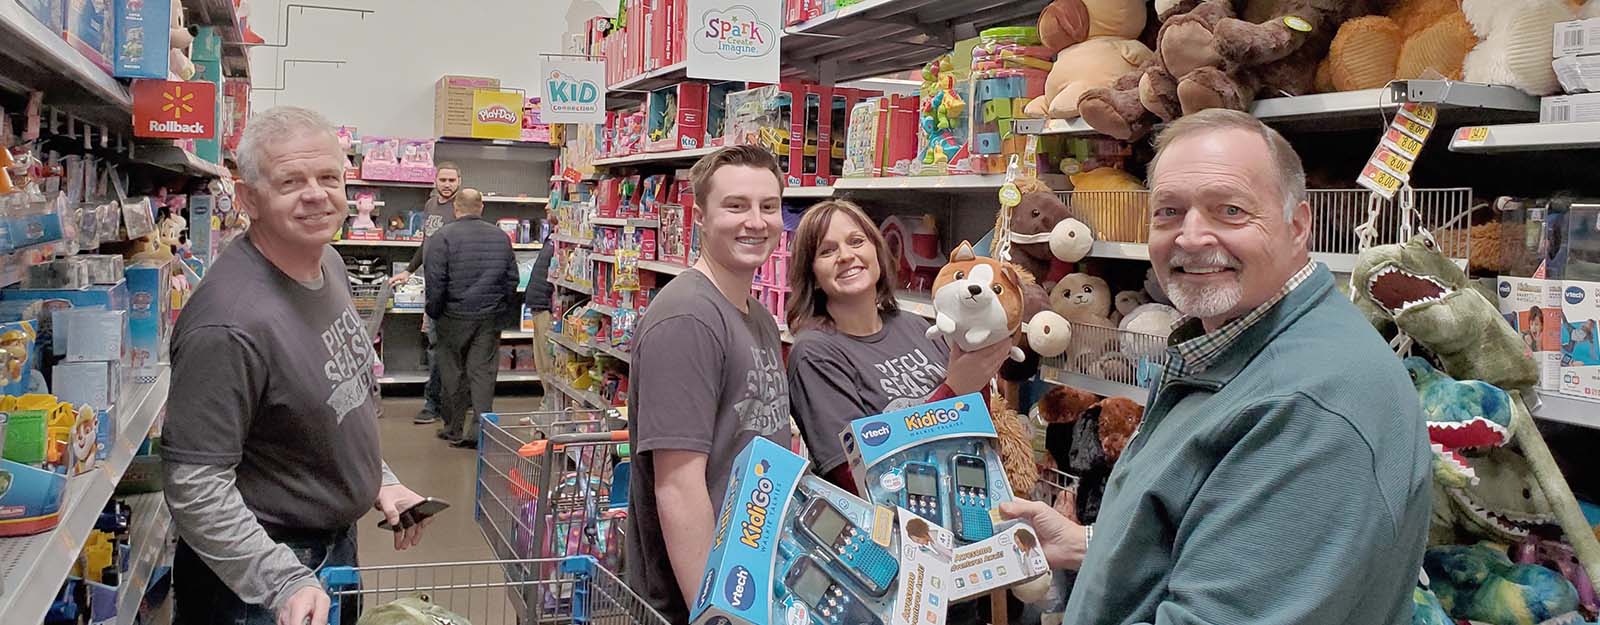 People smiling in toy aisle